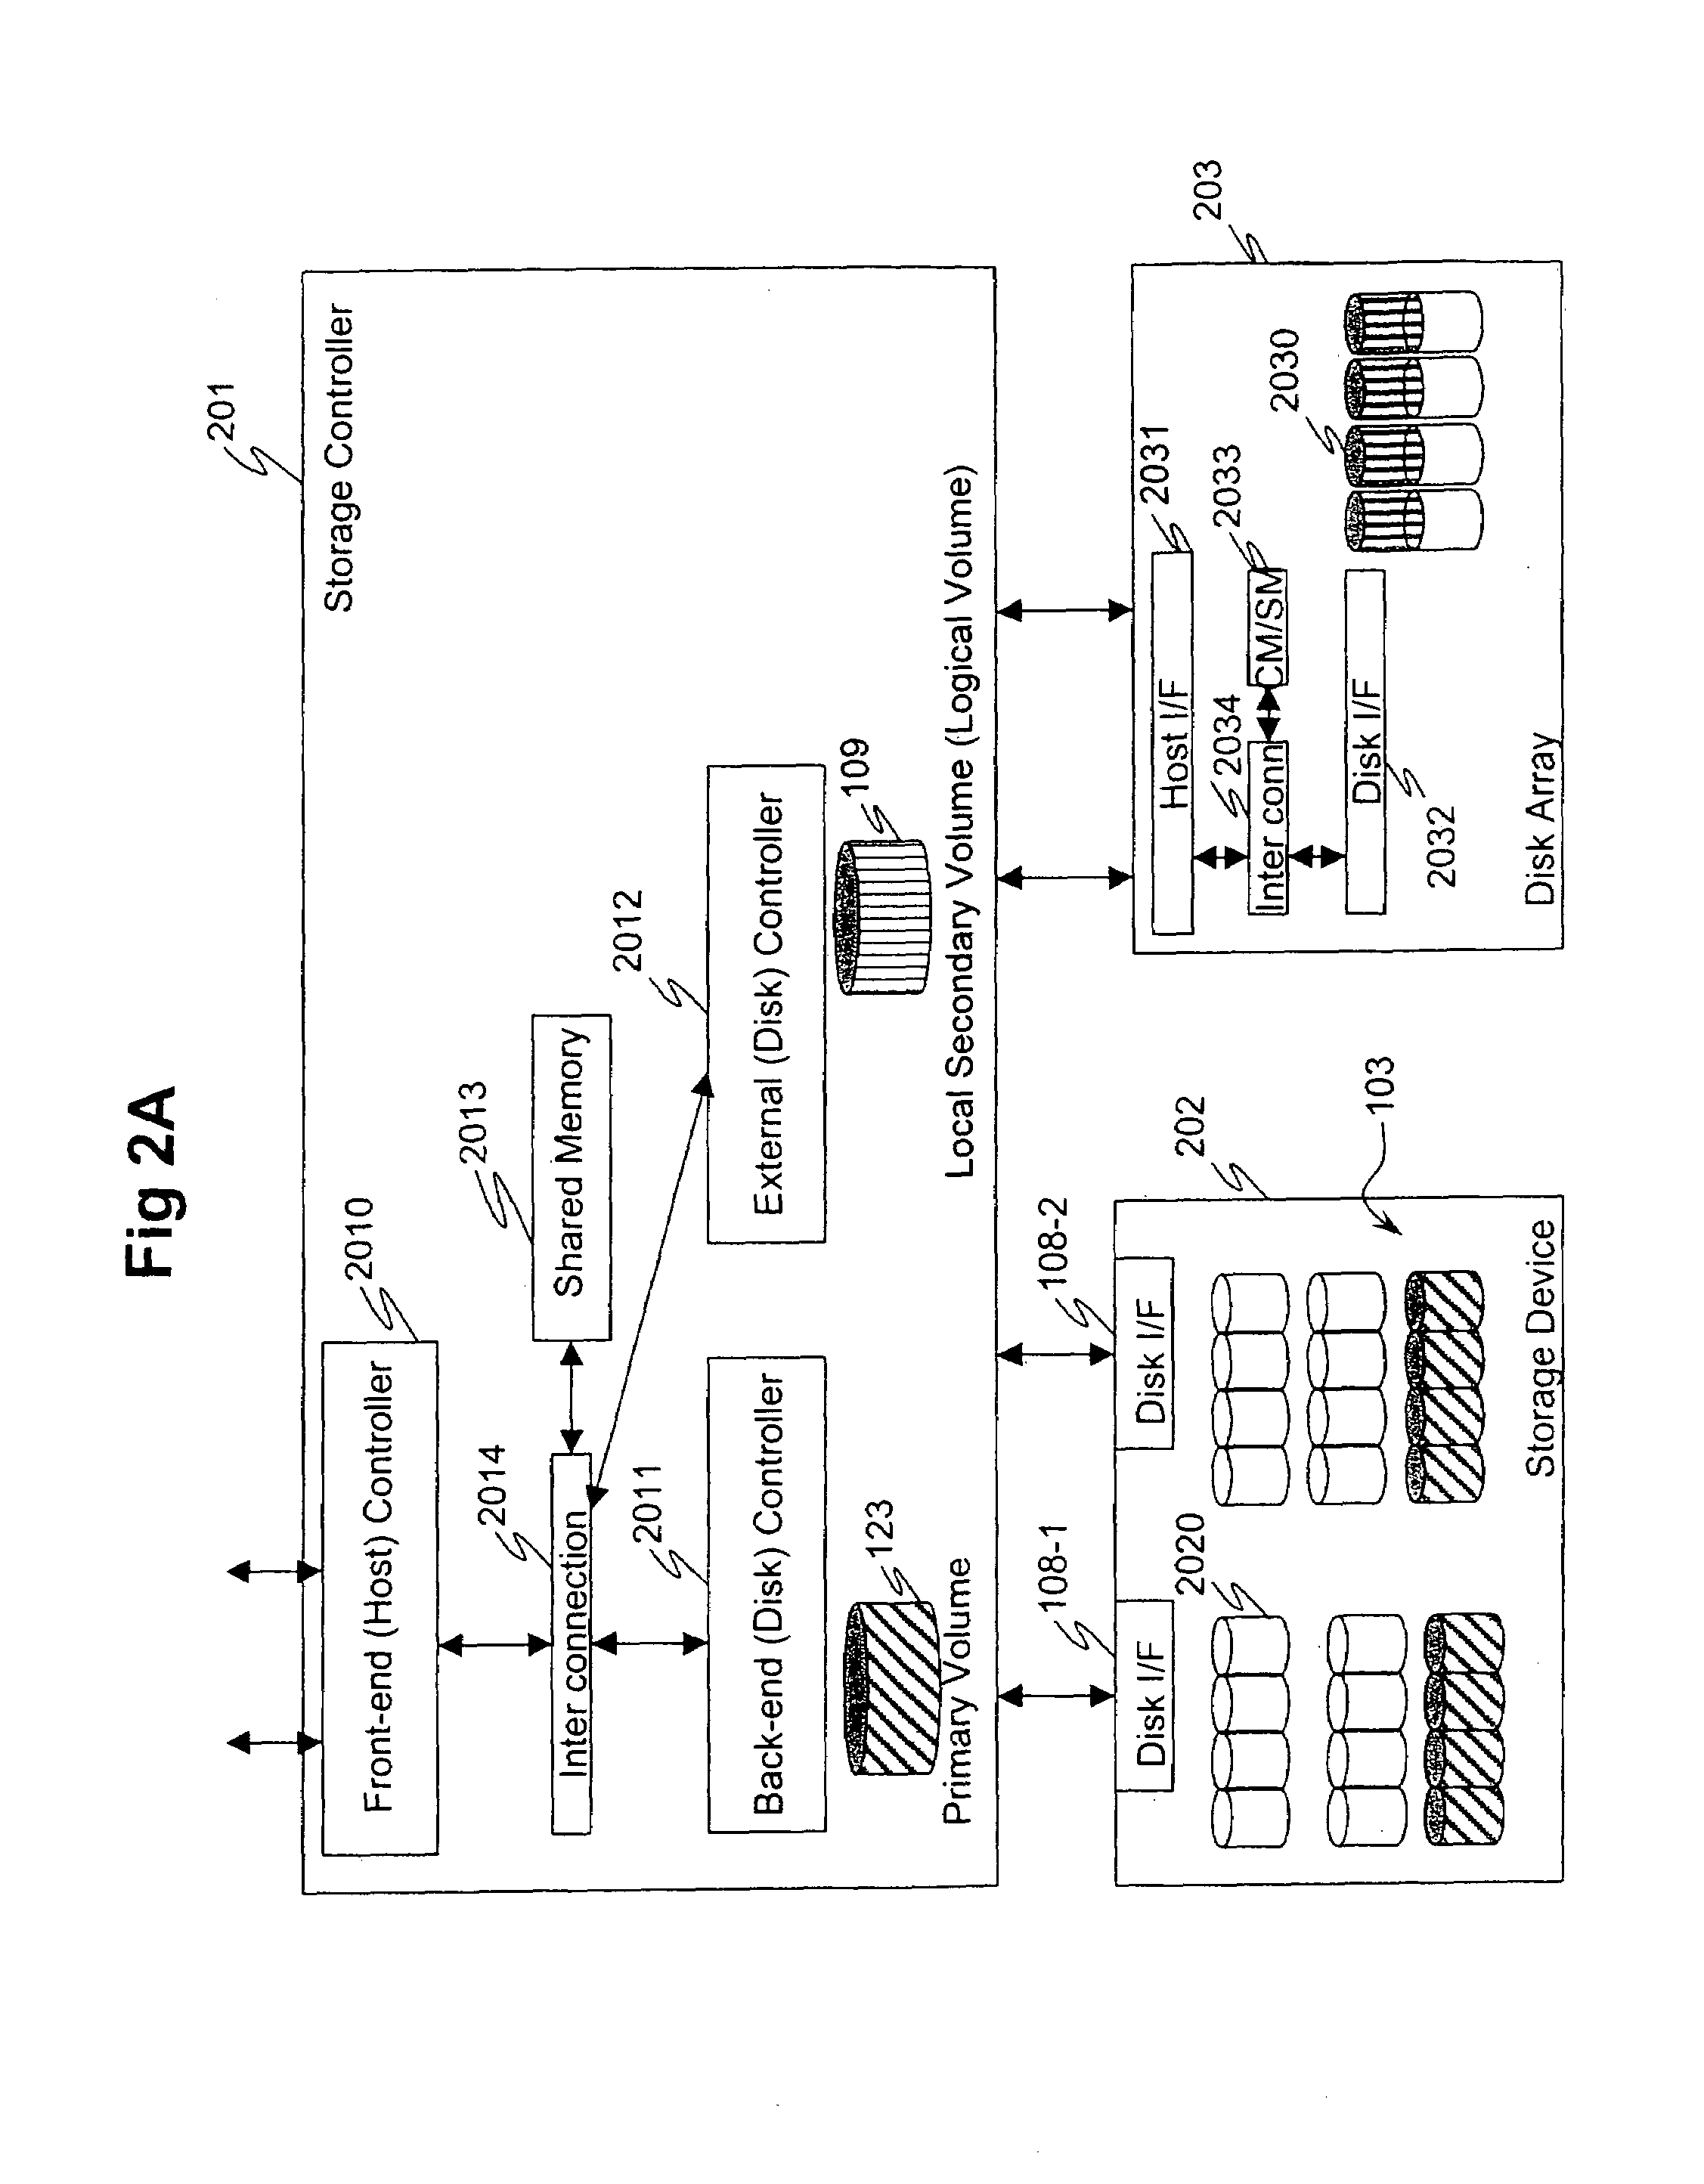 Method and apparatus for data migration with the efficient use of old assets